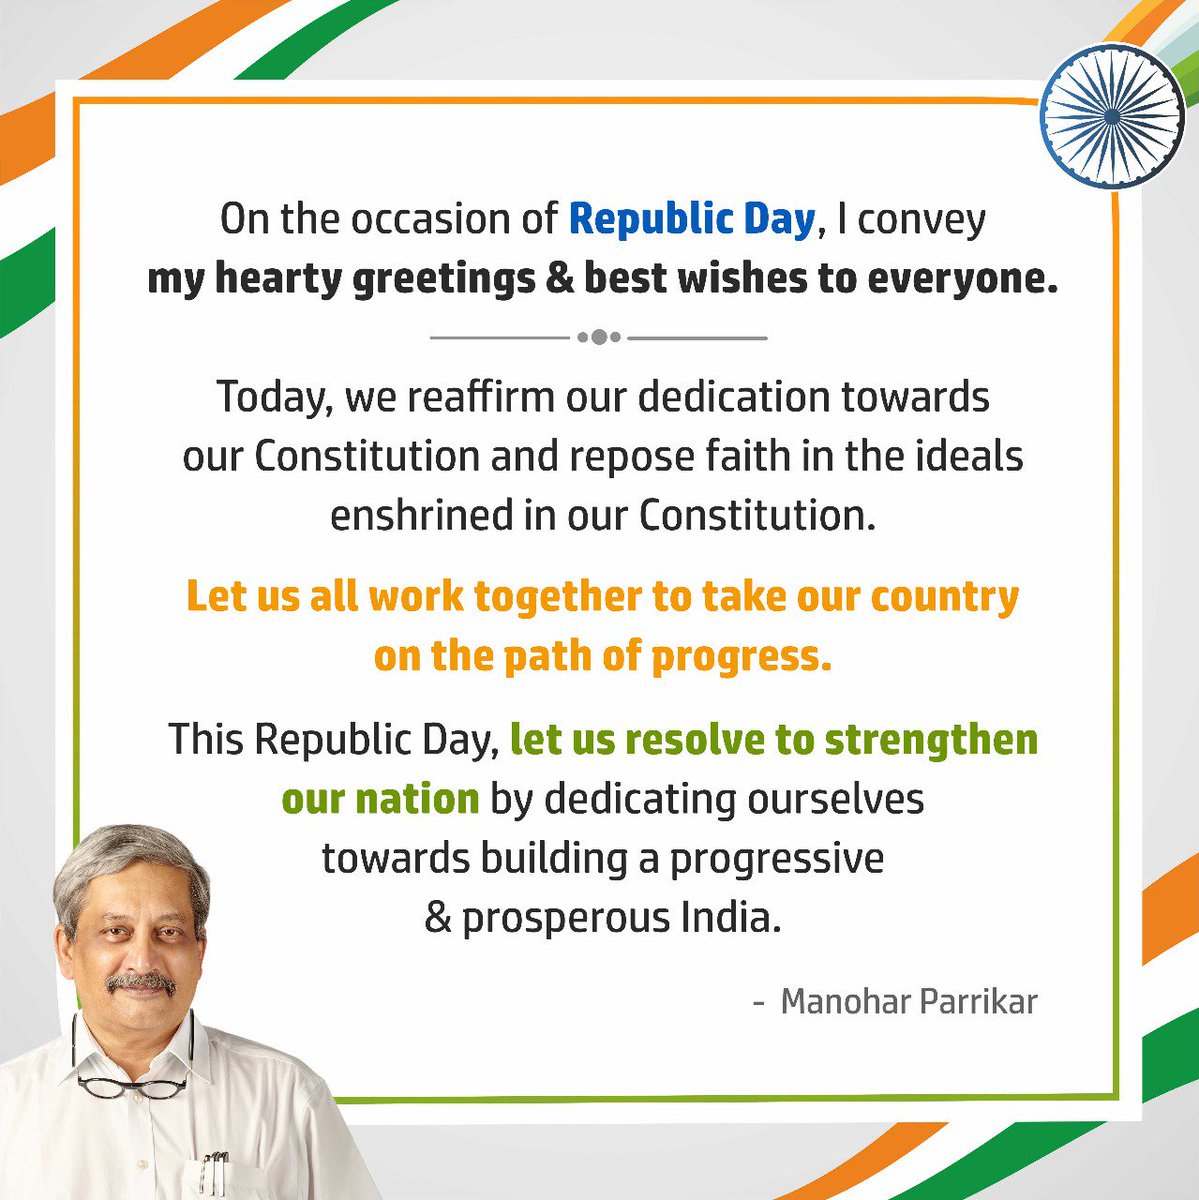 On the occasion of Republic Day, I convey my hearty greetings and best wishes to everyone.